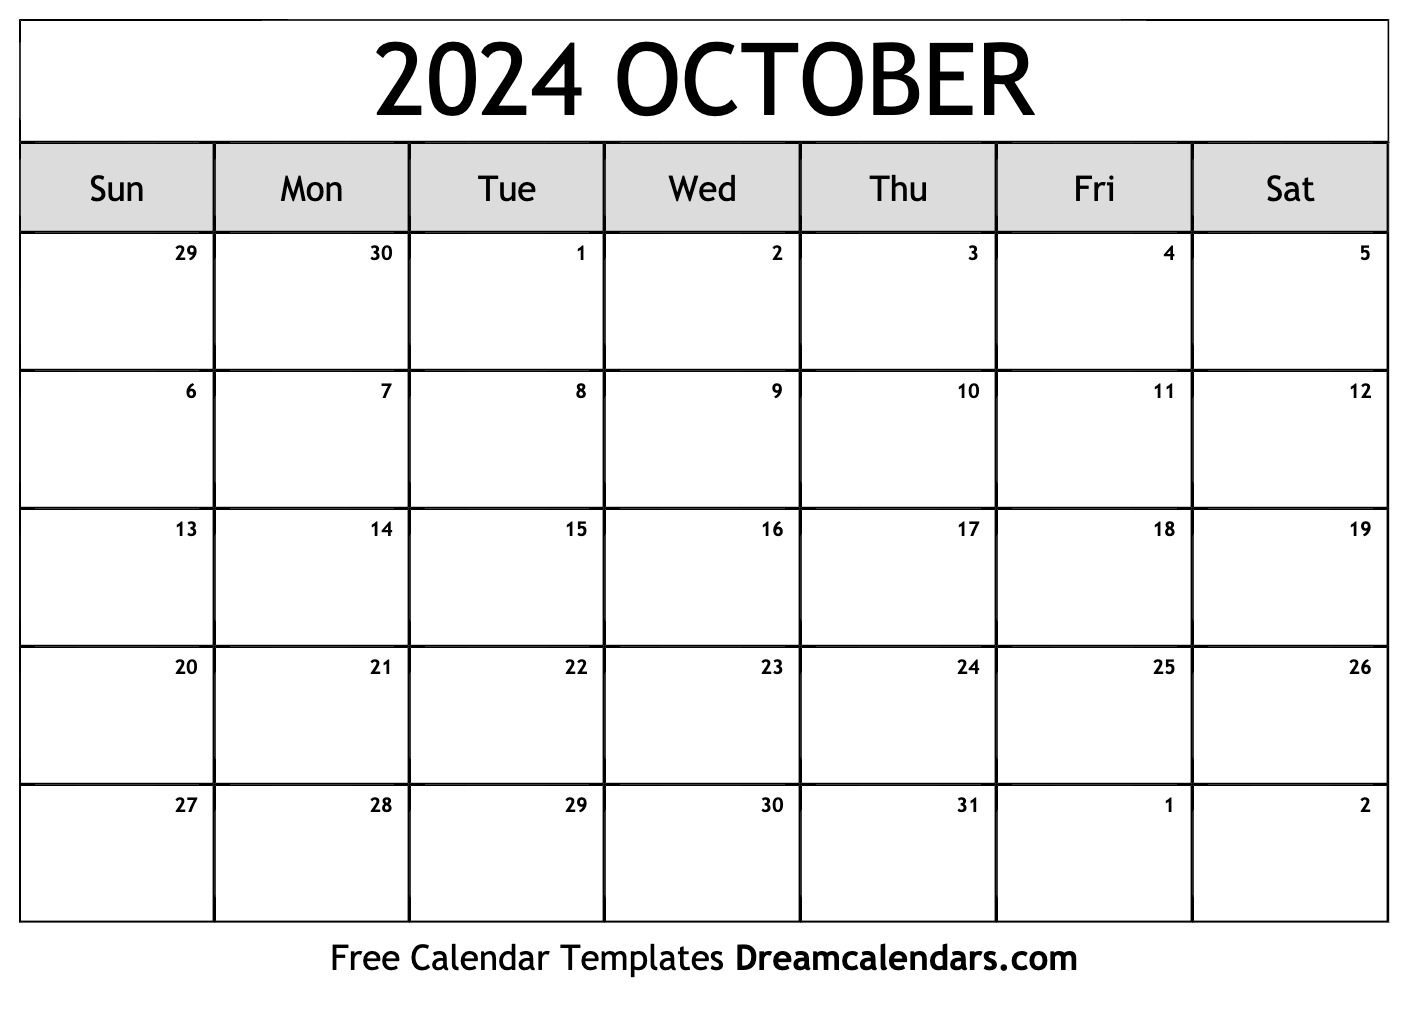 October 2024 Calendar | Free Blank Printable With Holidays for 2024 October Calendar Printable